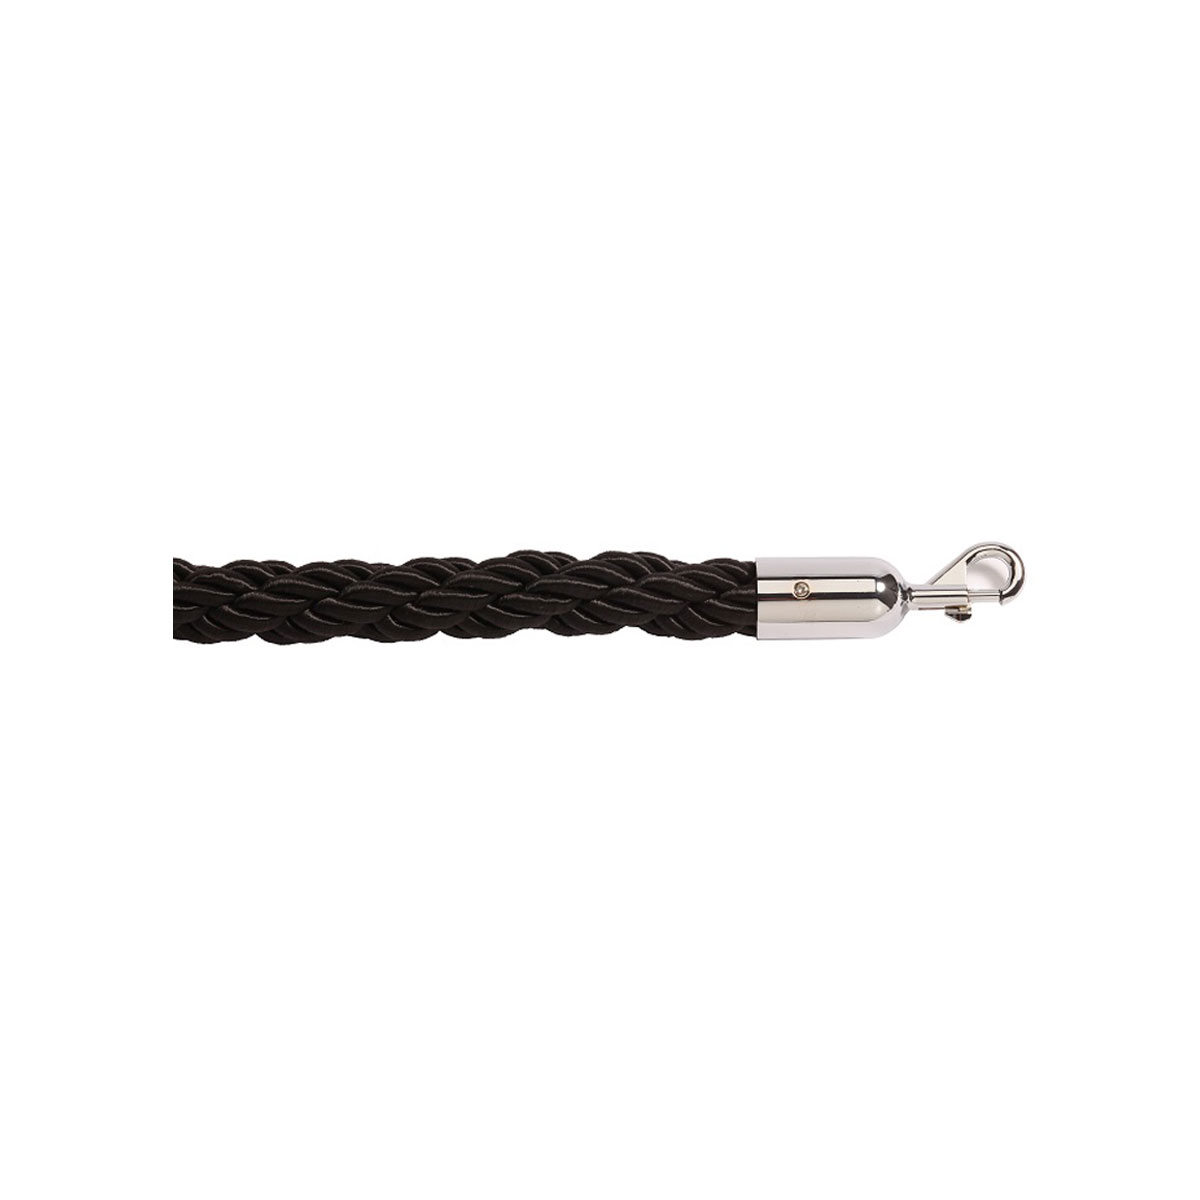 RopeMaster Post Barrier Ropes Black Braided Rope With Polished Chrome Snap End